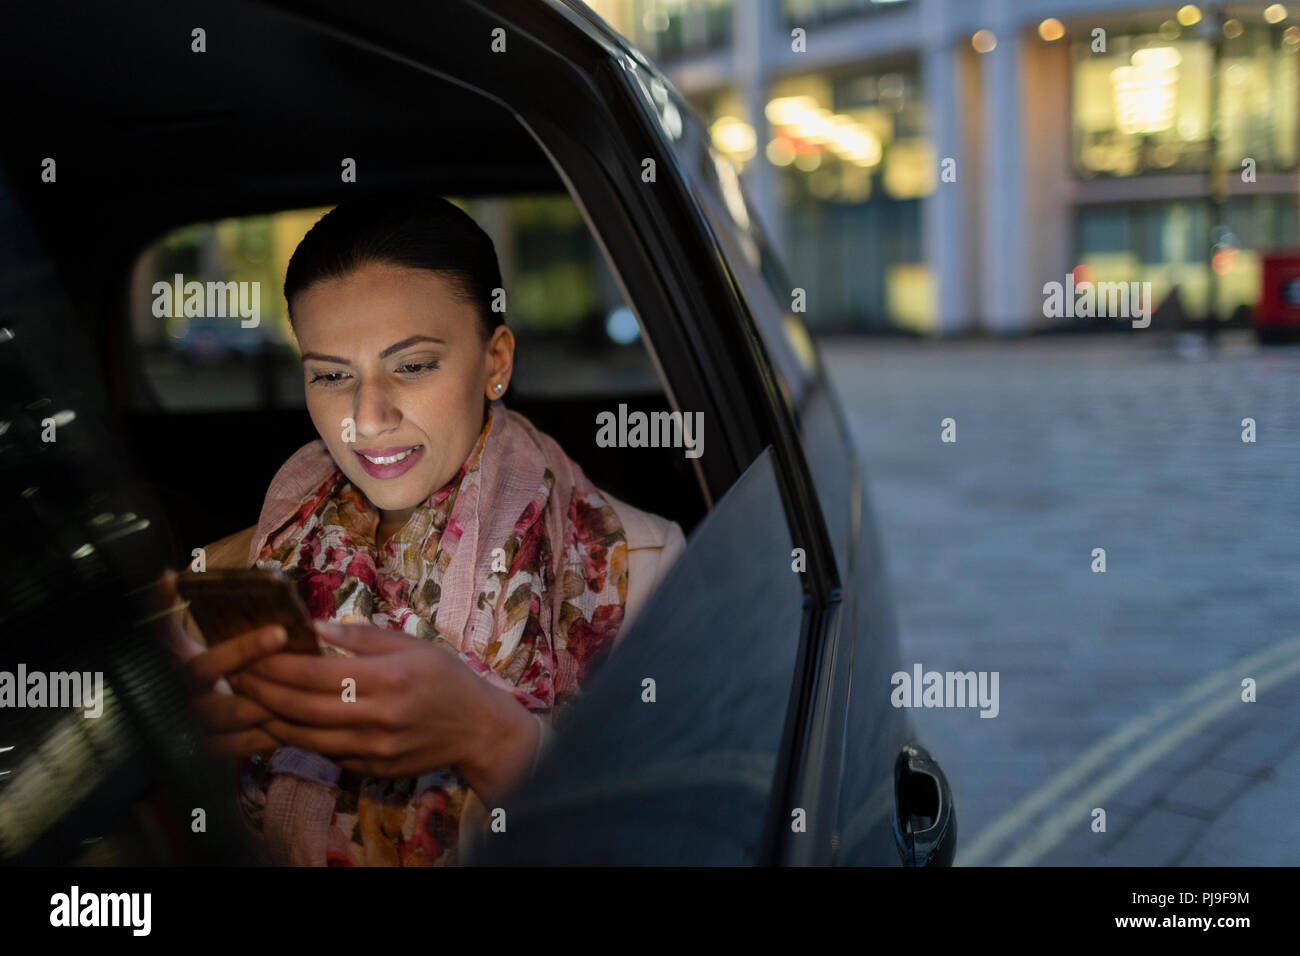 Businesswoman using smart phone in crowdsourced taxi at night Stock Photo